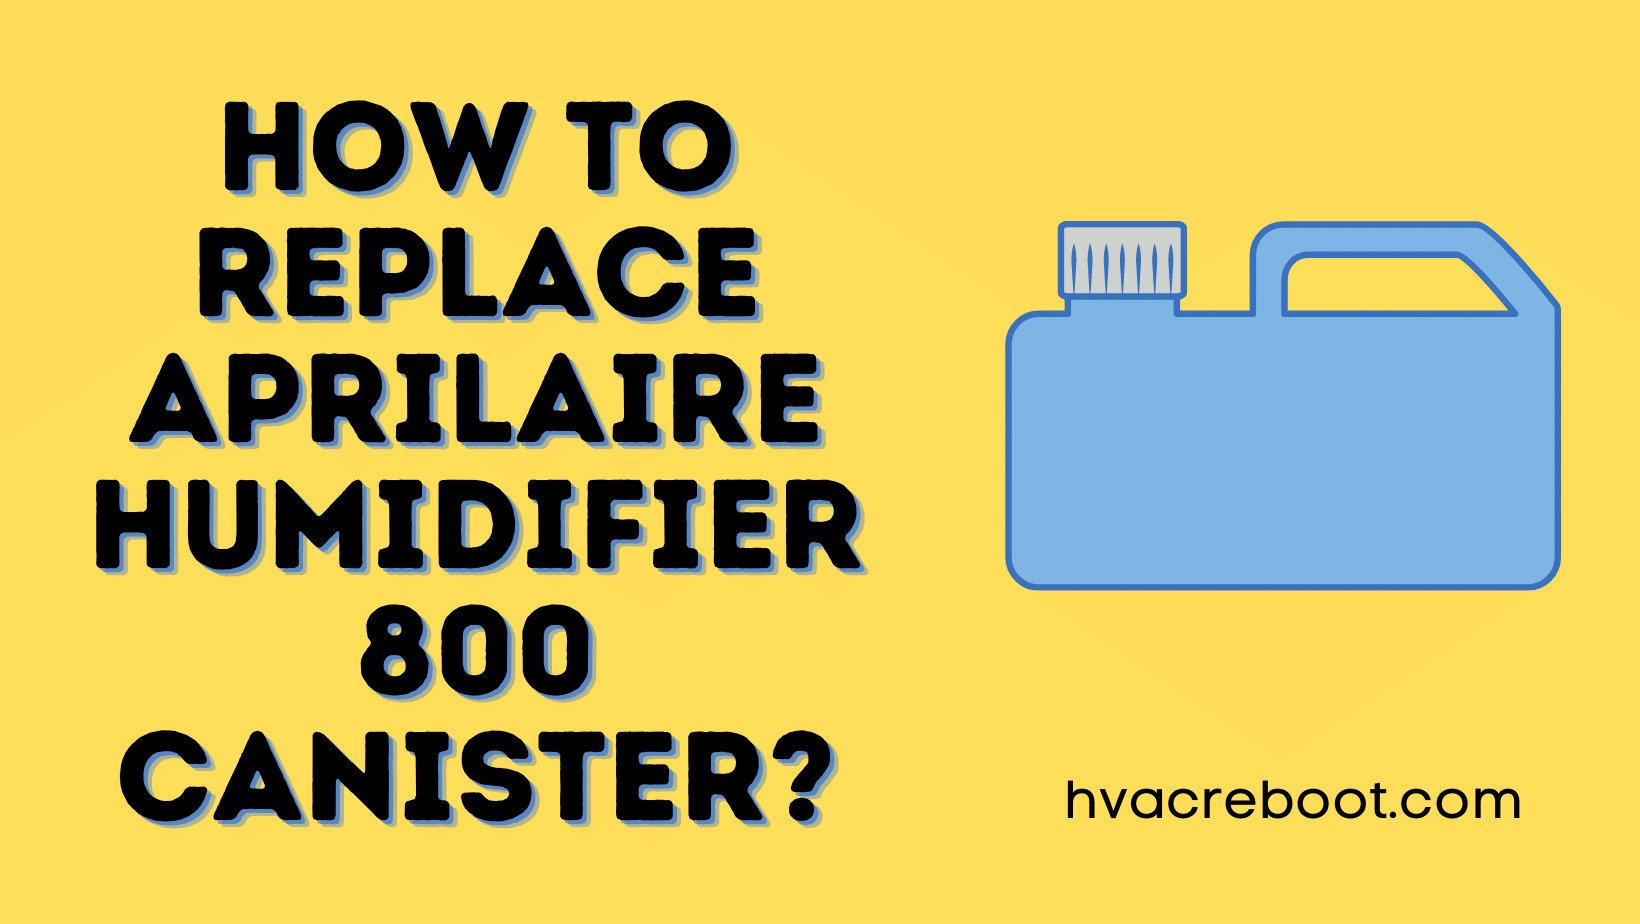 How To Replace Aprilaire Humidifier 800 Canister